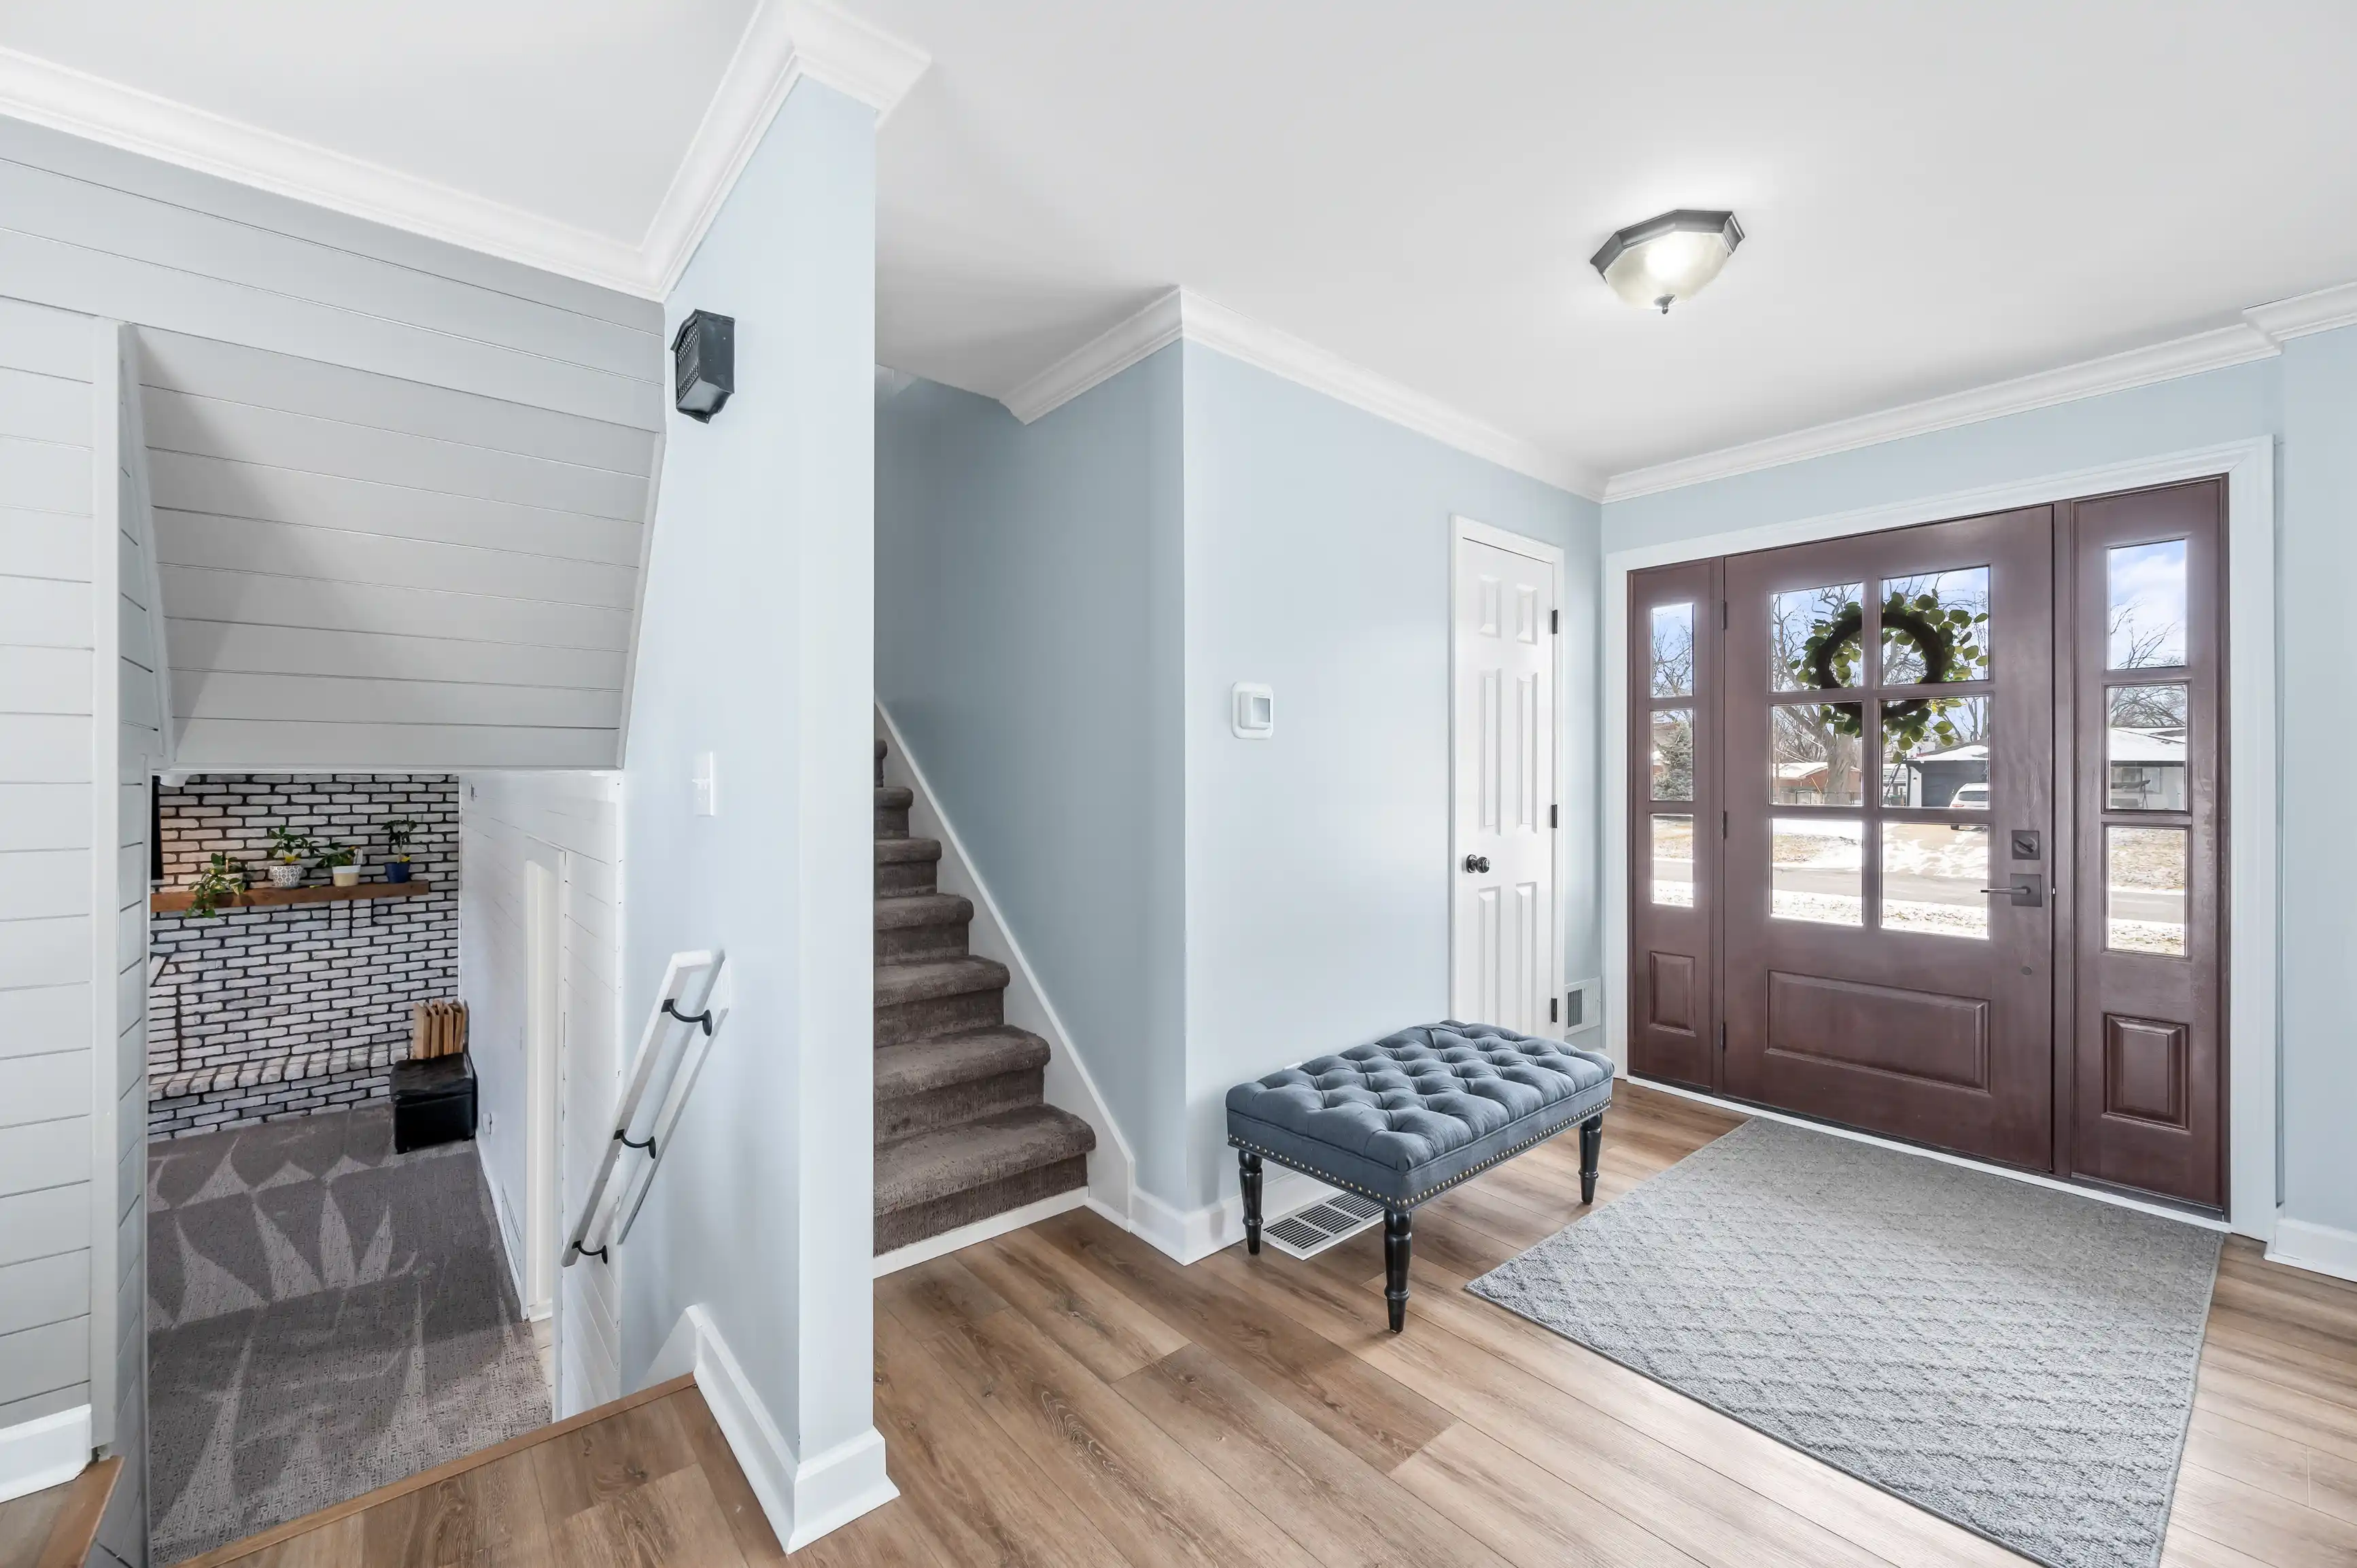 Bright and airy entryway with wooden floors, a light blue color scheme, a staircase to the left, a tiled front facing fireplace, and a large wooden front door with glass panels.